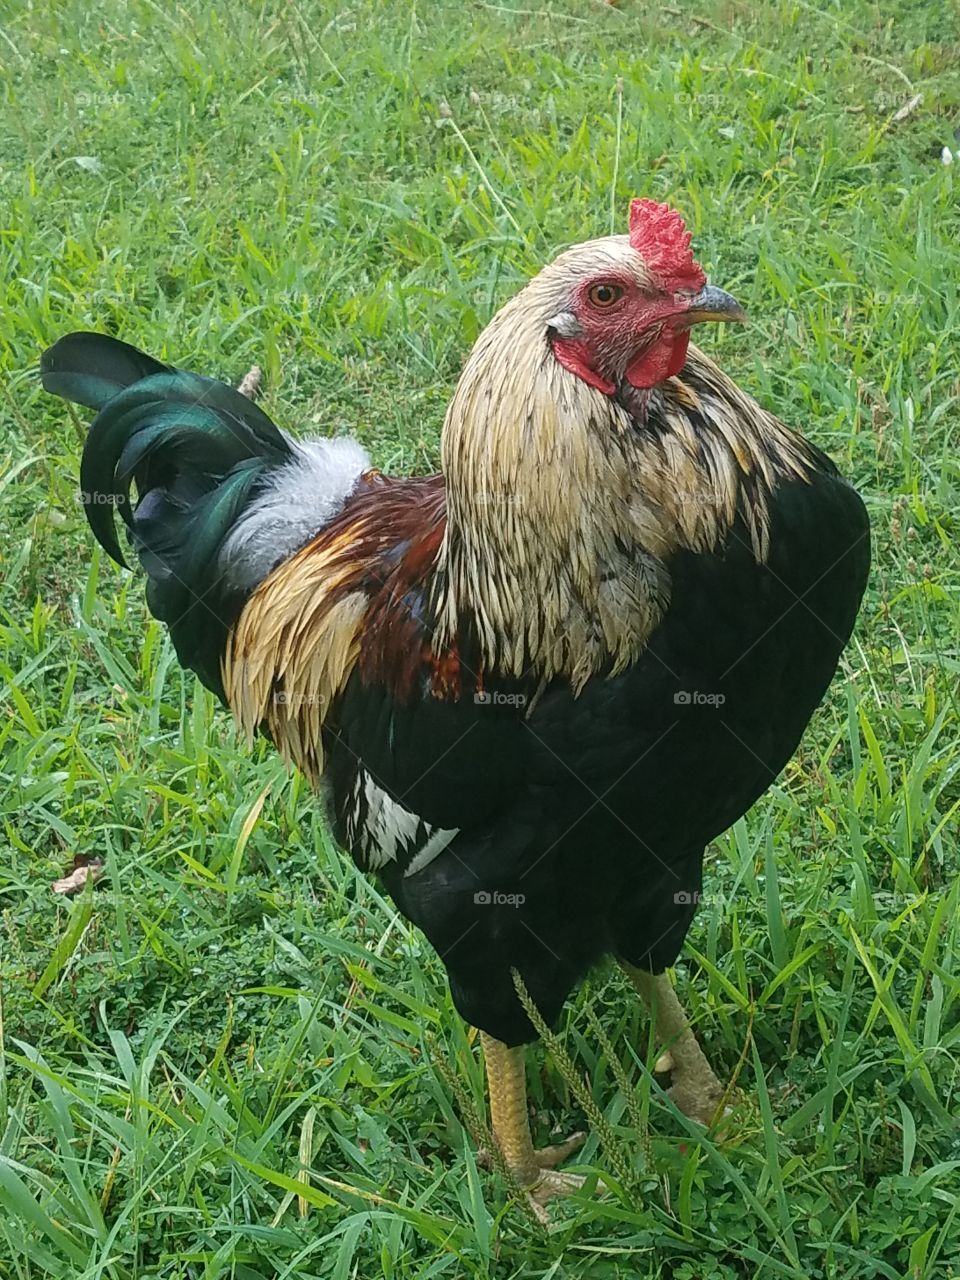 Stripey the rooster